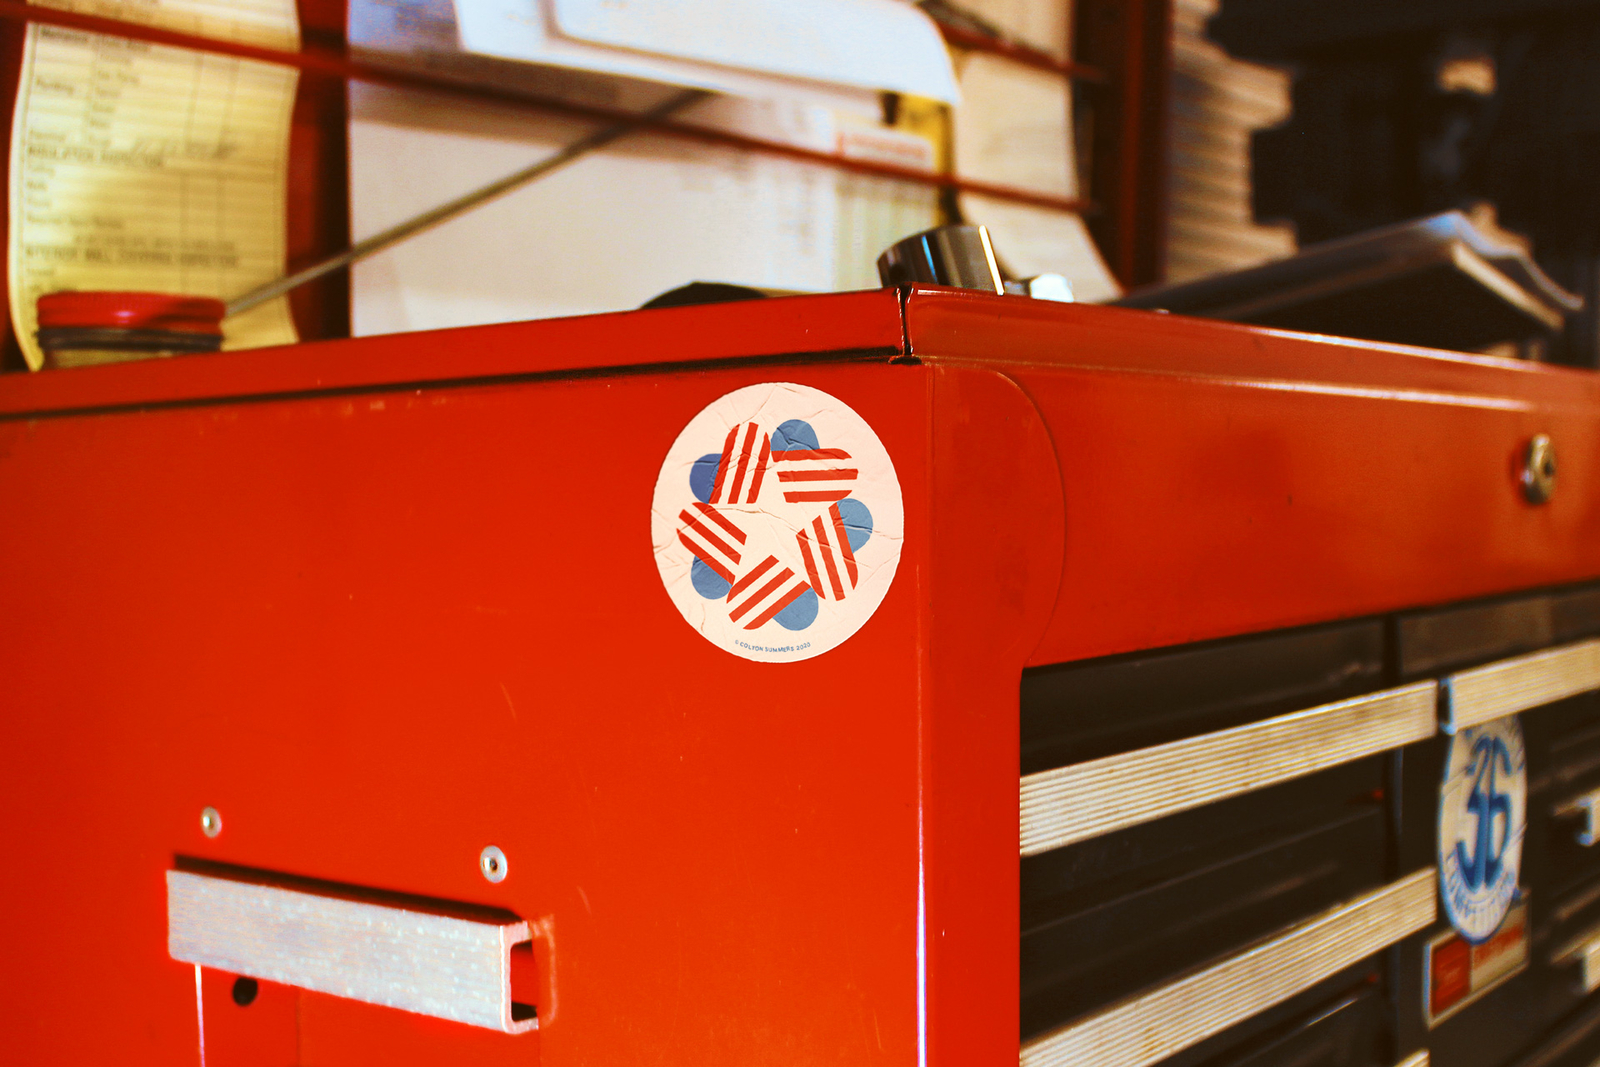 Download Toolbox Sticker Mockup By Colton Summers On Dribbble